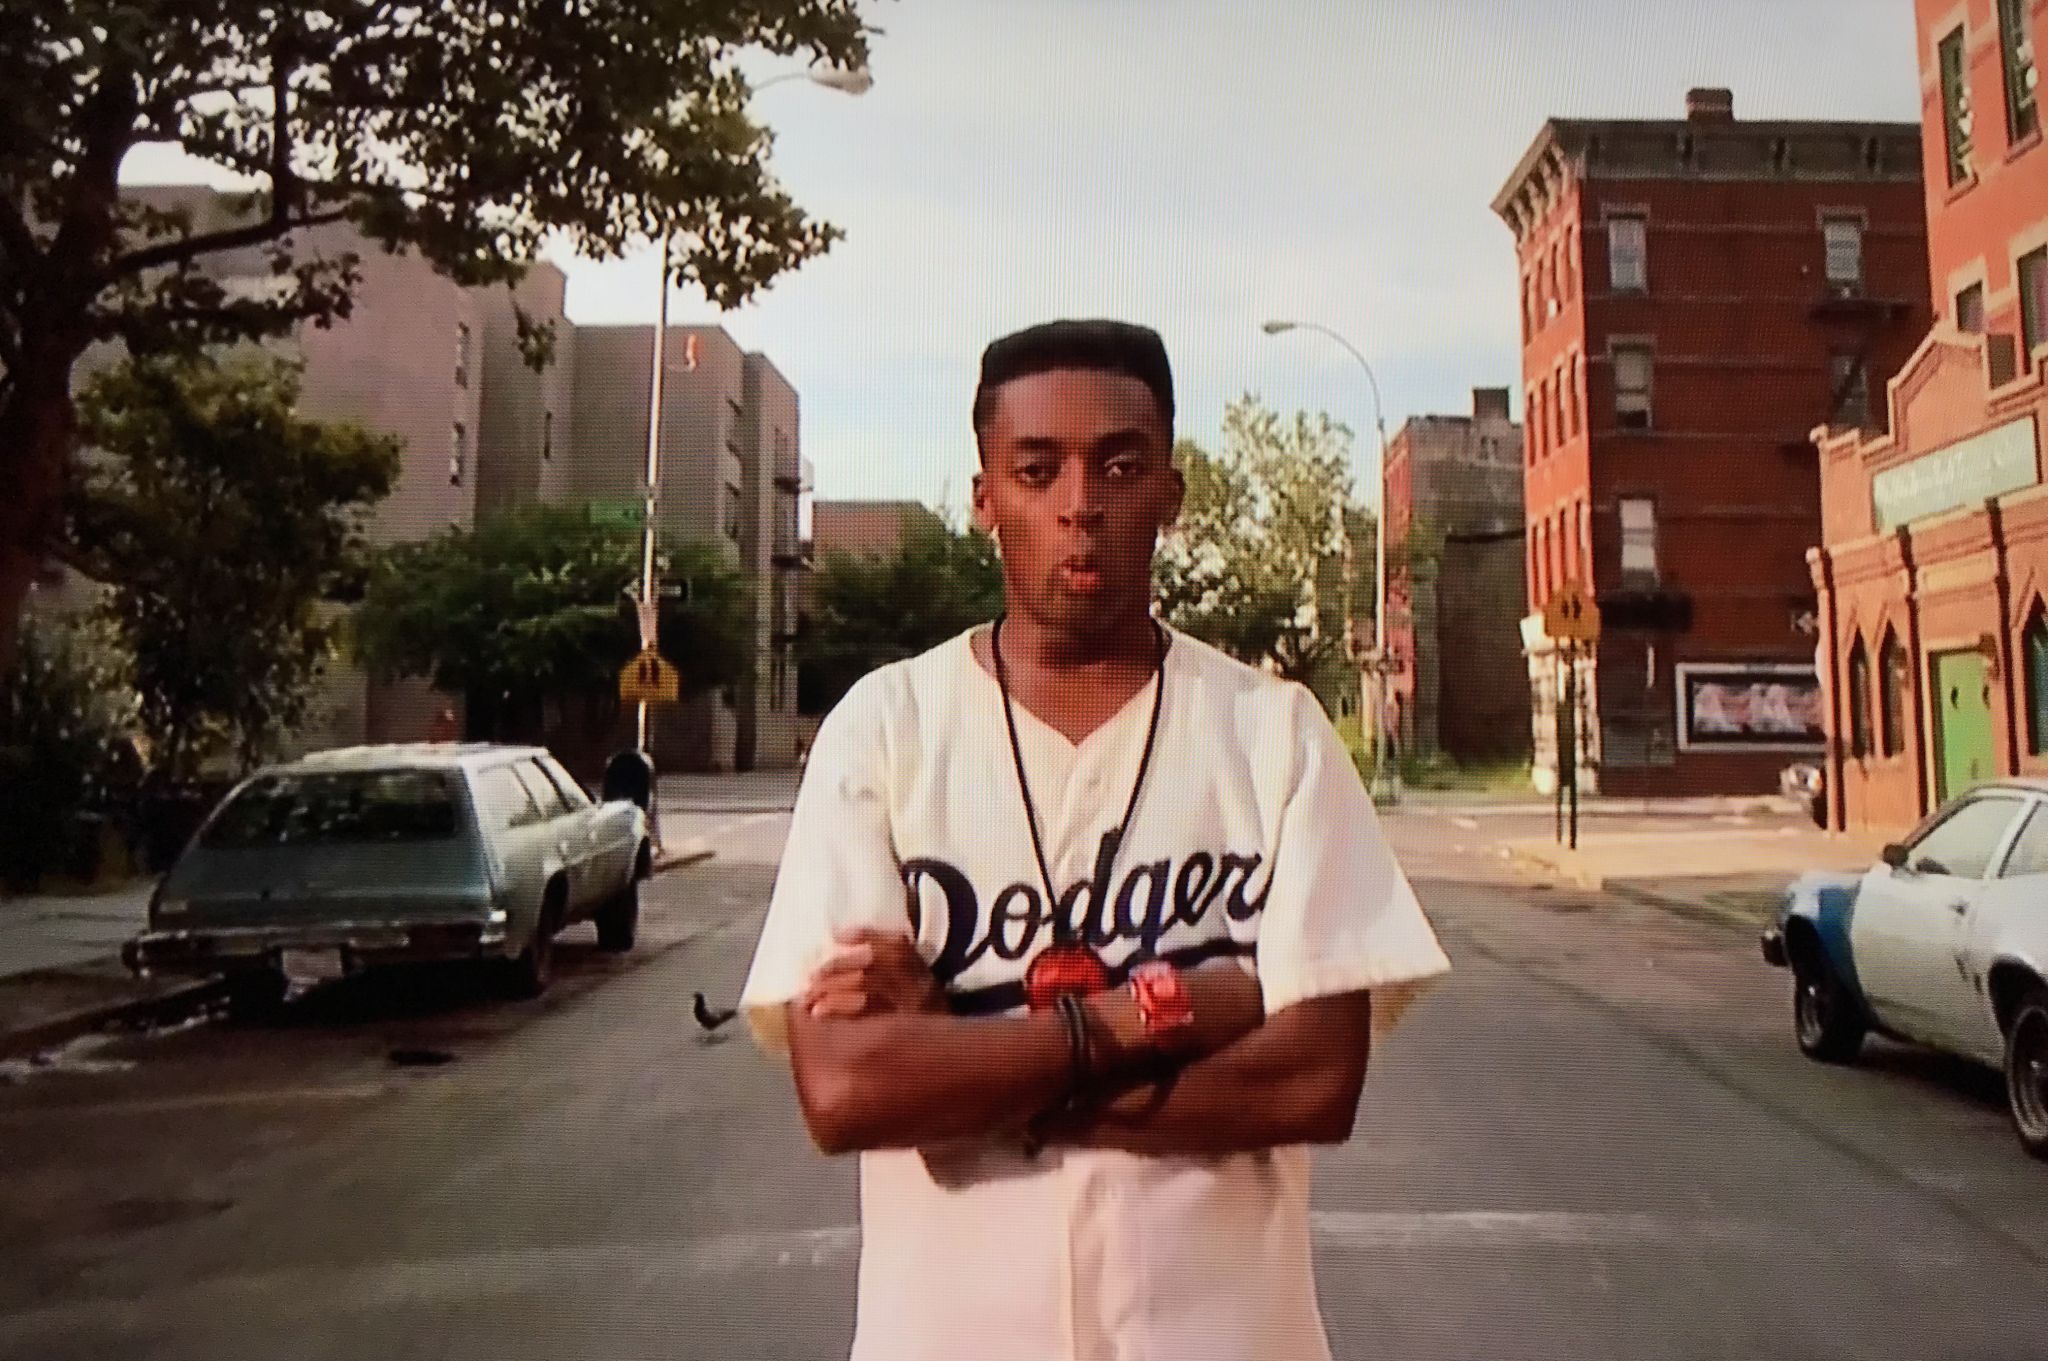 Inspired by Mookie and his neighborhood, the BED STUY BASEBALL